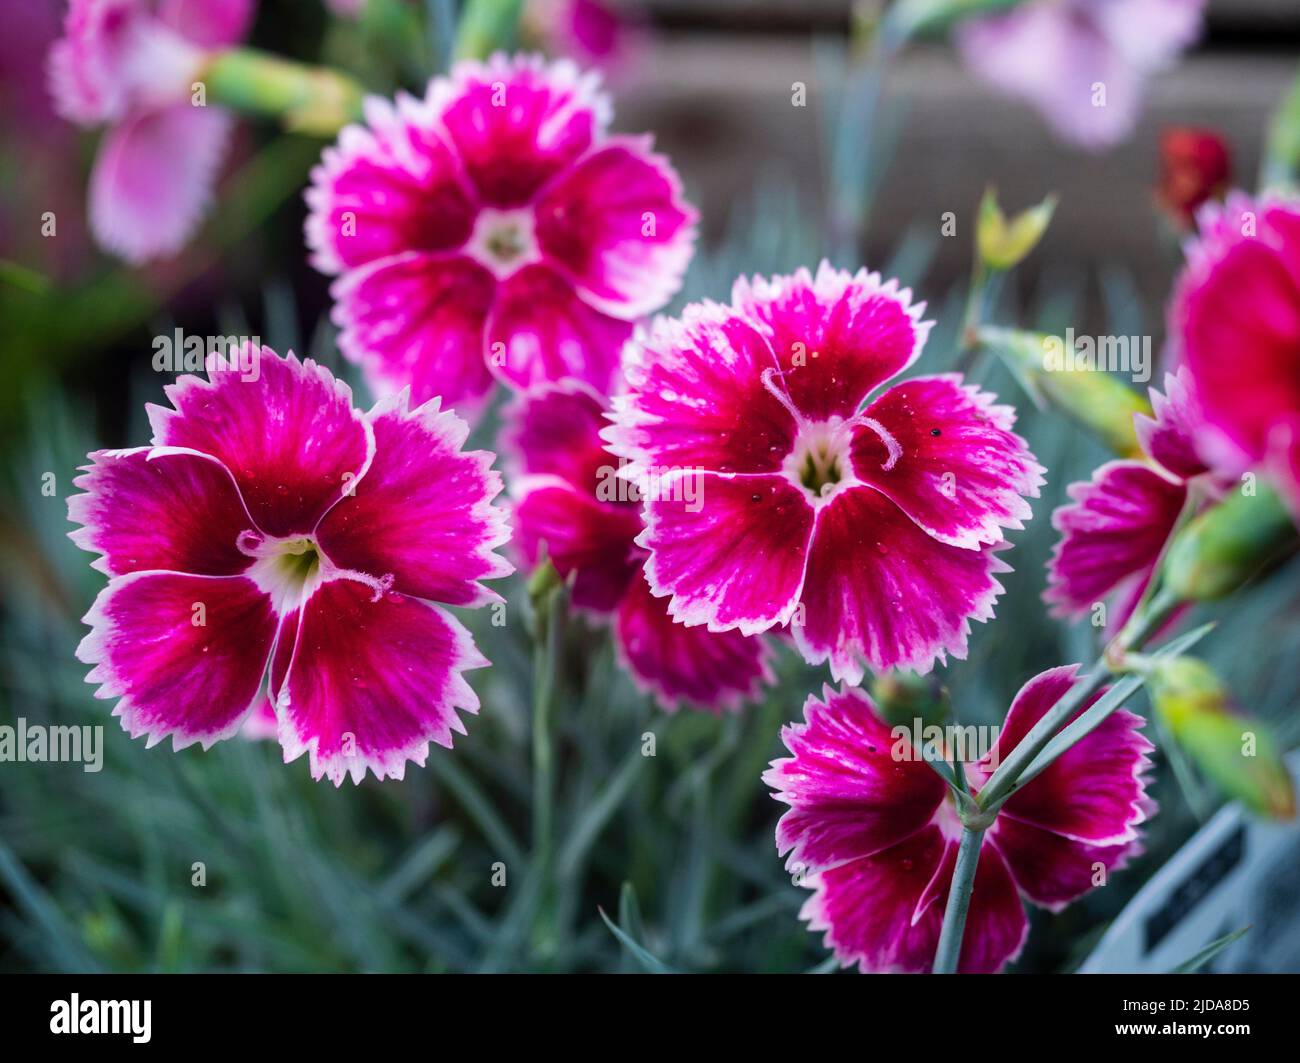 White edged fragrant pink flowers of the summer blooming alpine pink, Dianthus 'Flutterburst' Stock Photo